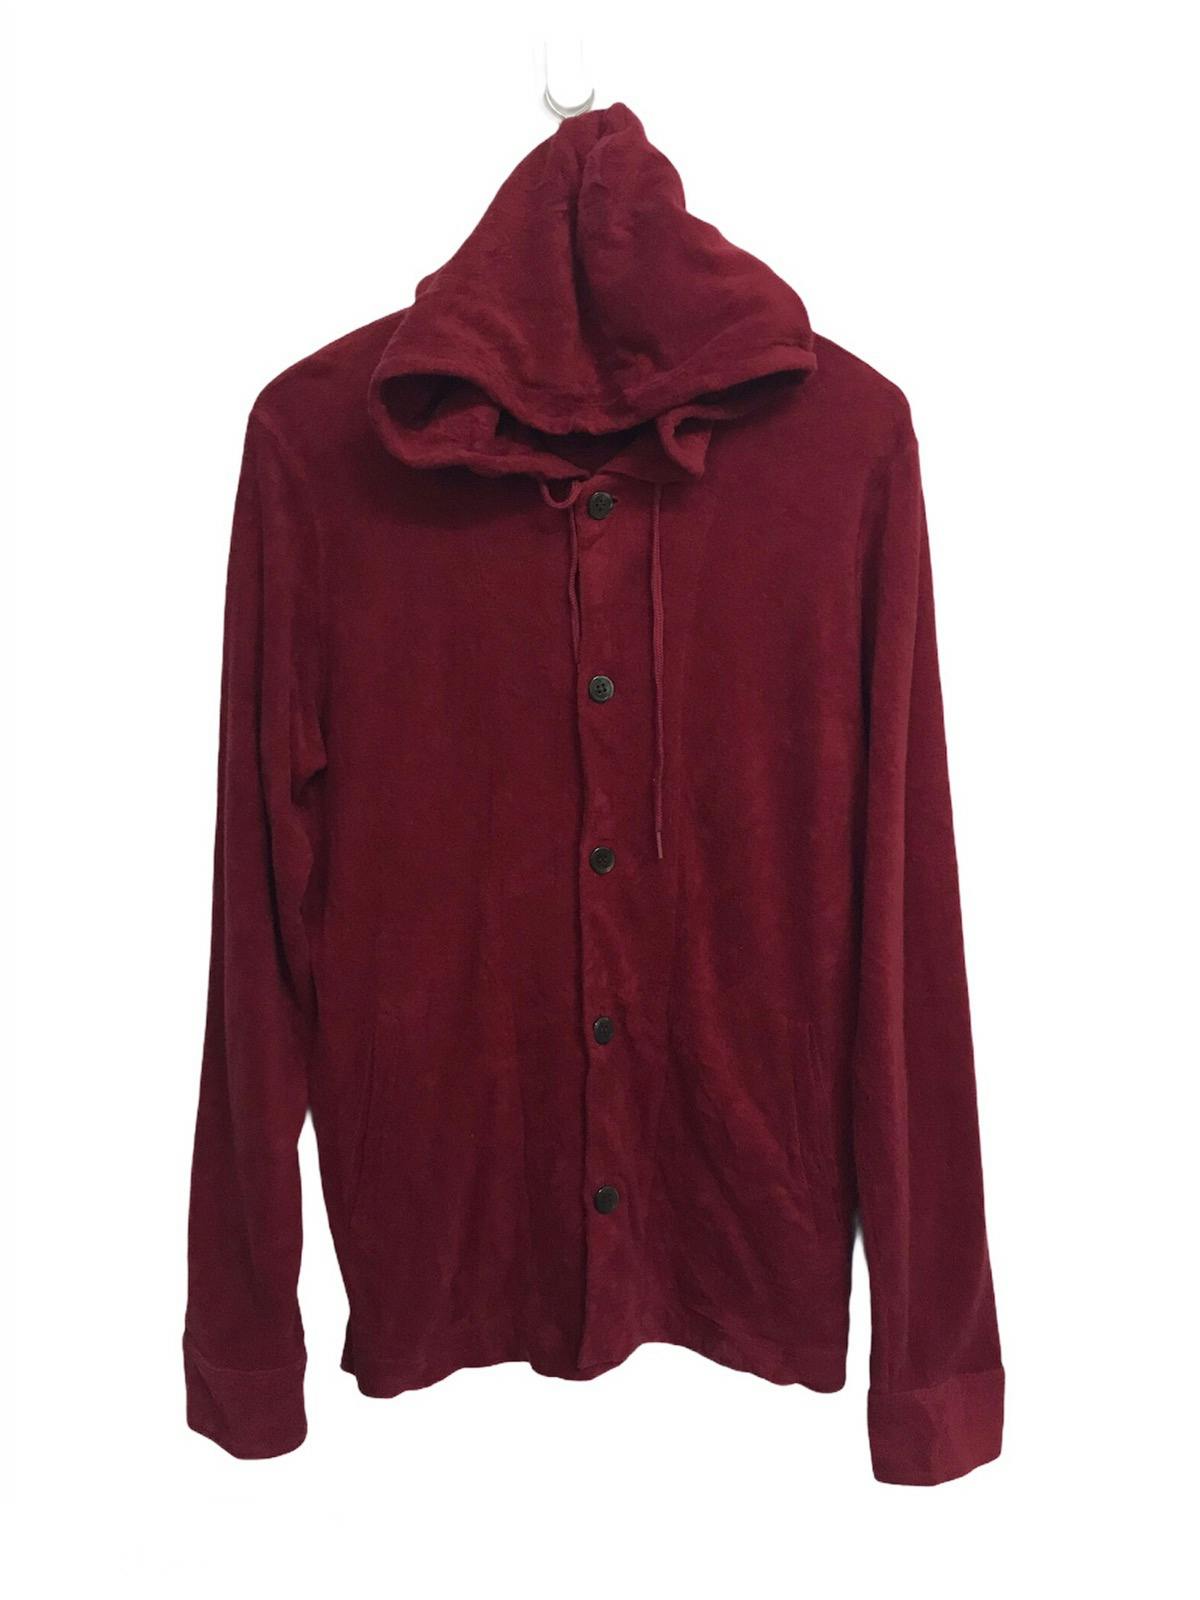 Paul Smith Button Up Hoodie Jacket Made in Japan - 1